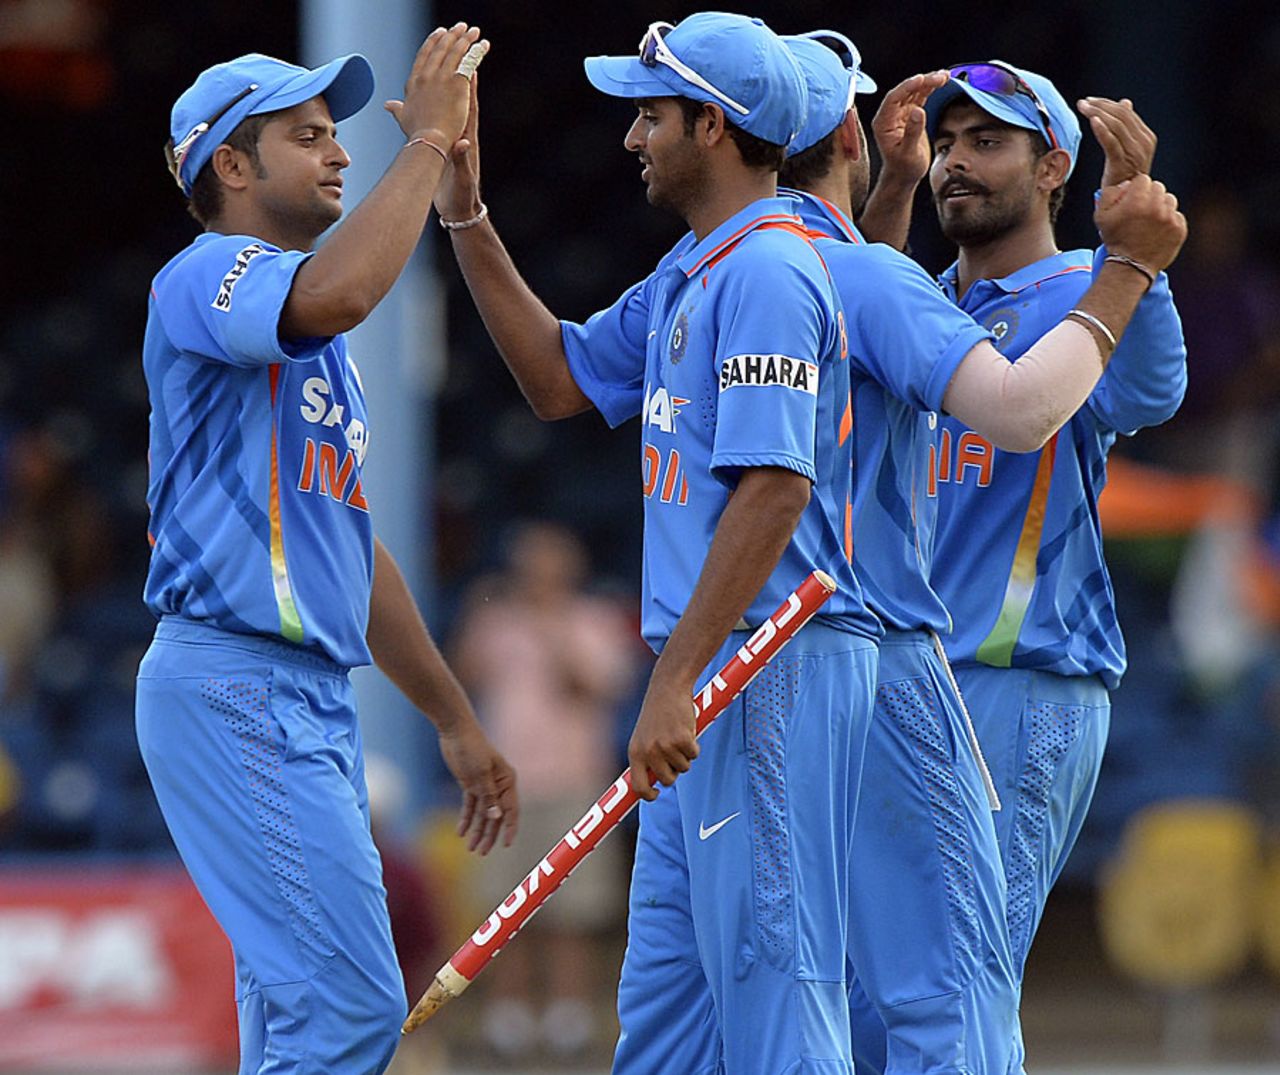 India wrapped up the innings for 96 and took the bonus point, India v Sri Lanka, West Indies tri-series, Port-of-Spain, July 9, 2013